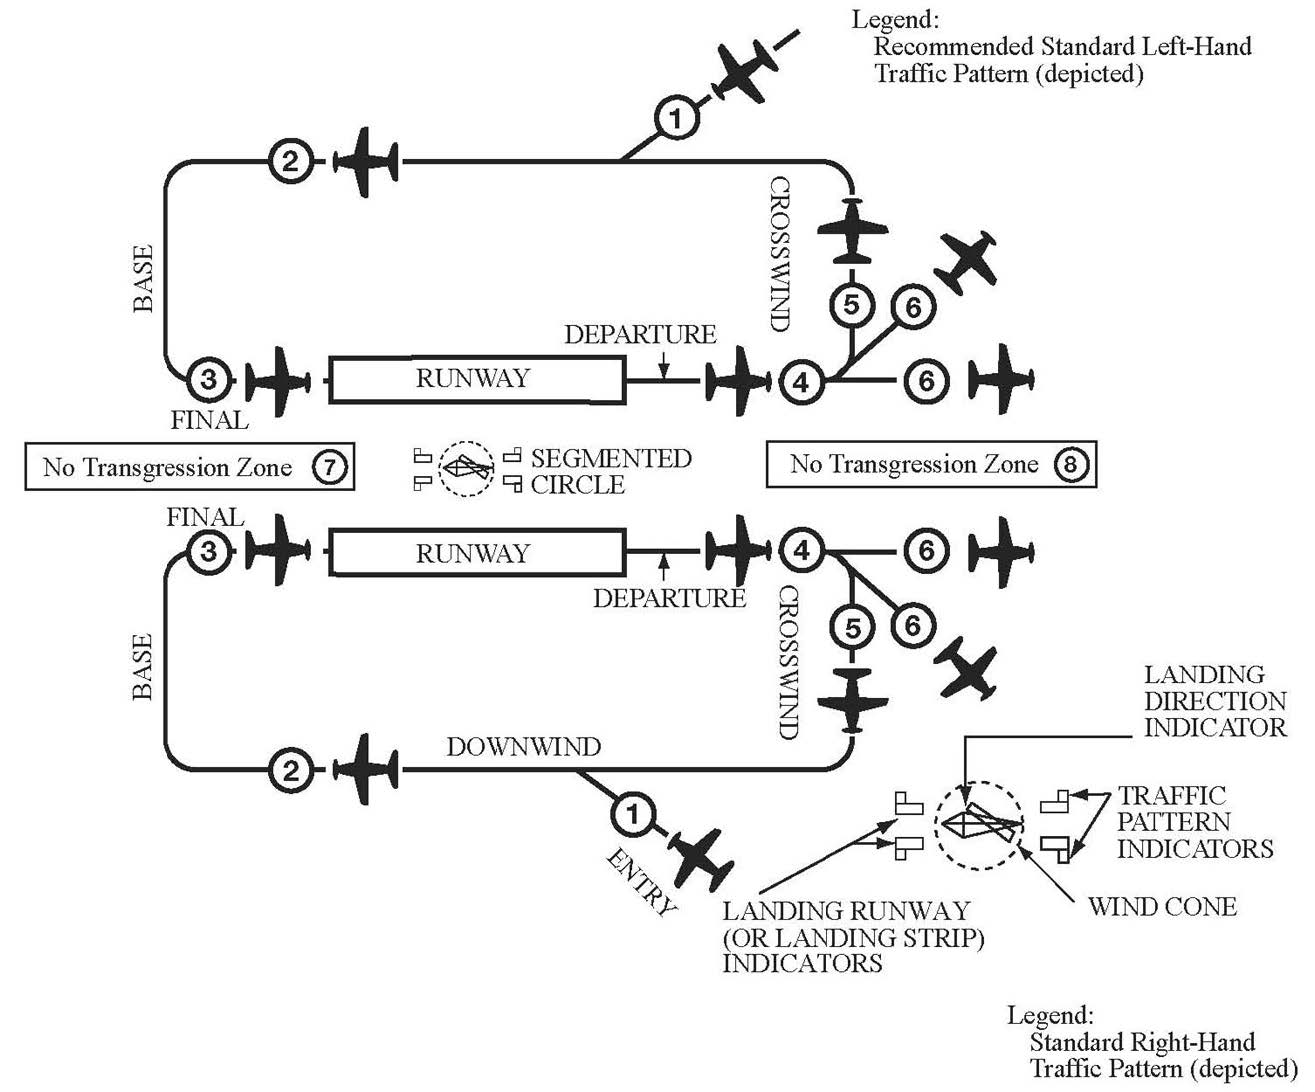 A graphic depicting the traffic pattern operations on parallel runways.